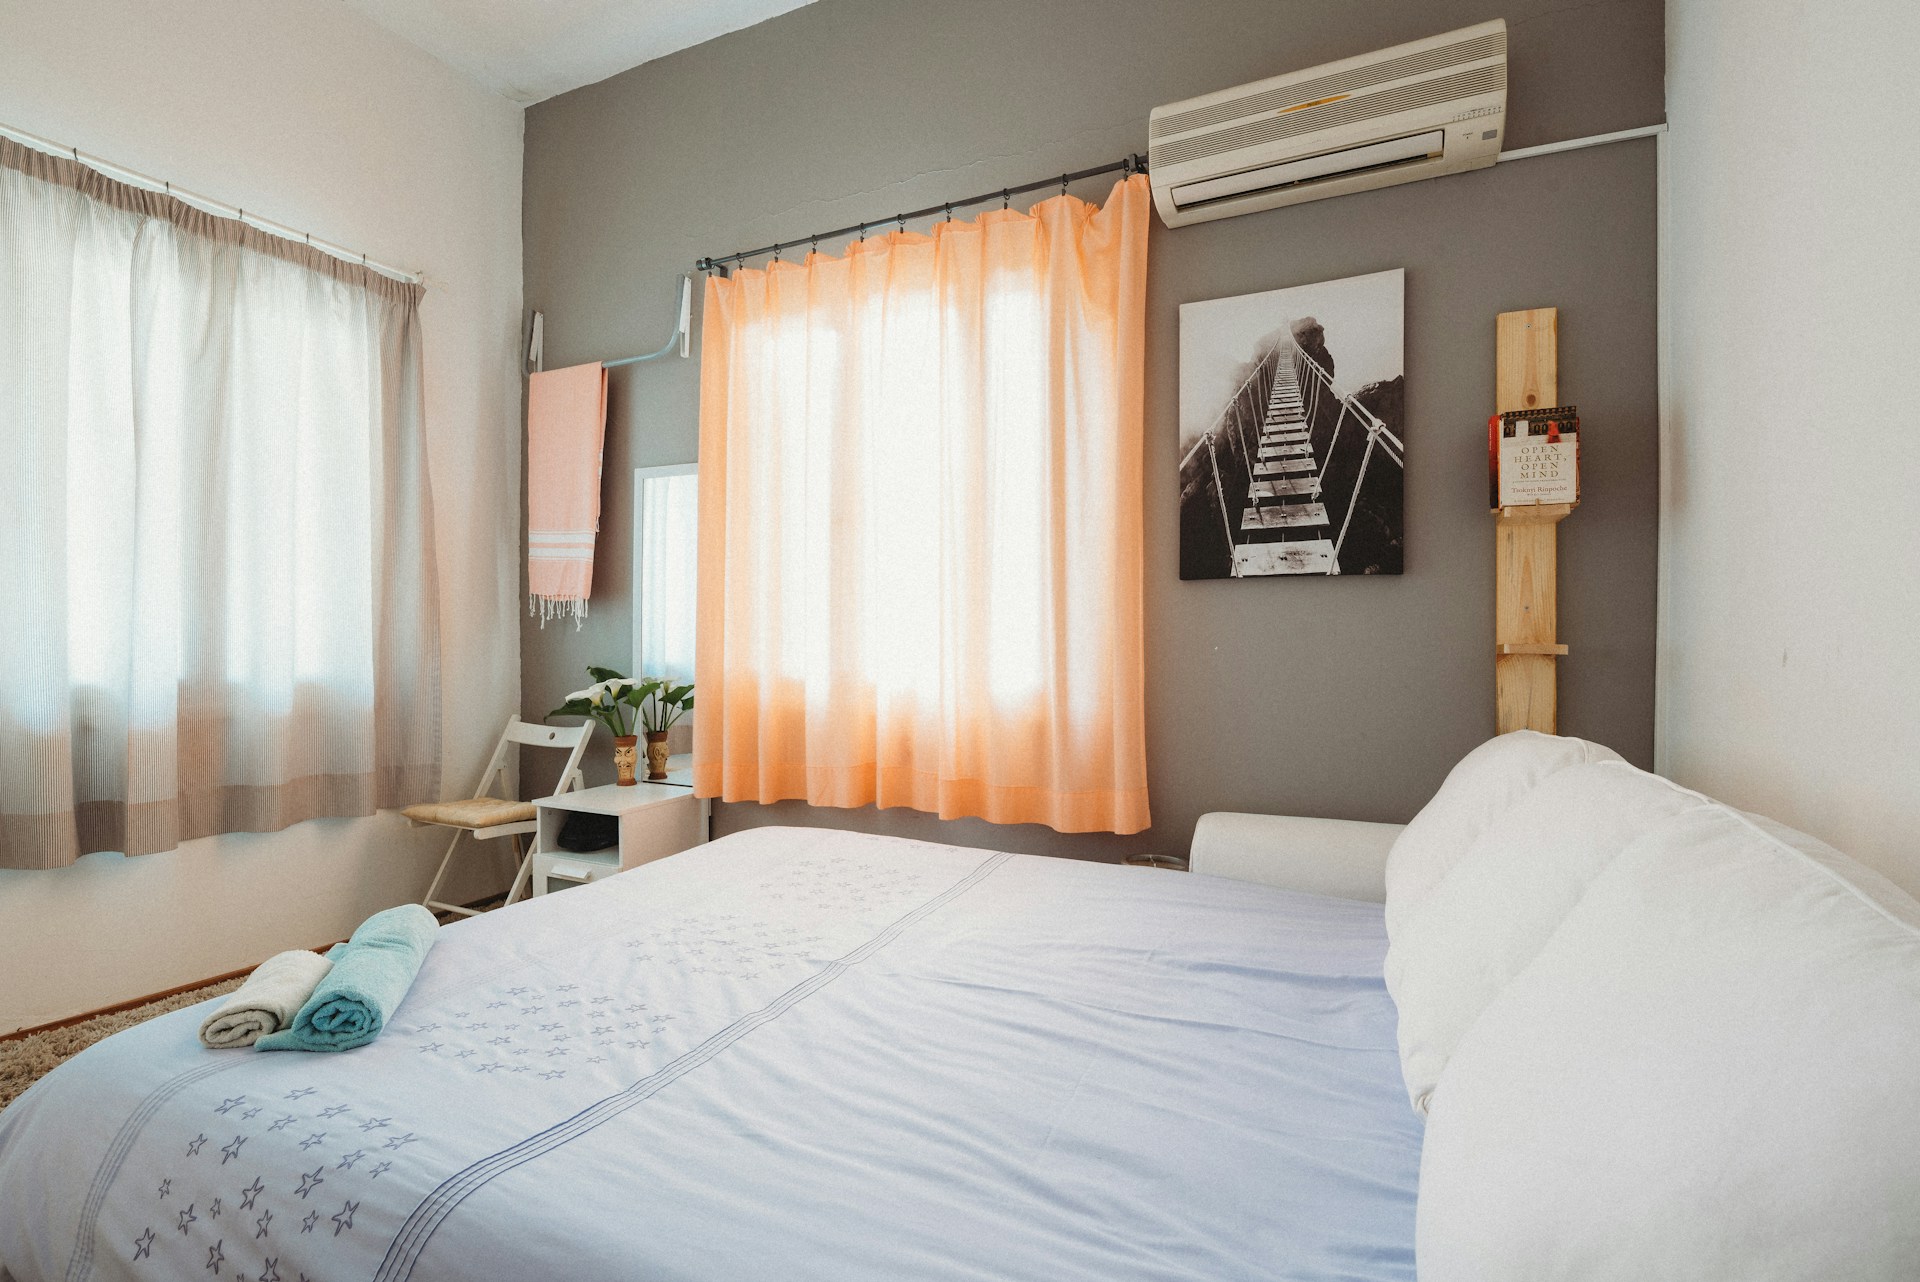 What is a realistic occupancy rate for Airbnb?